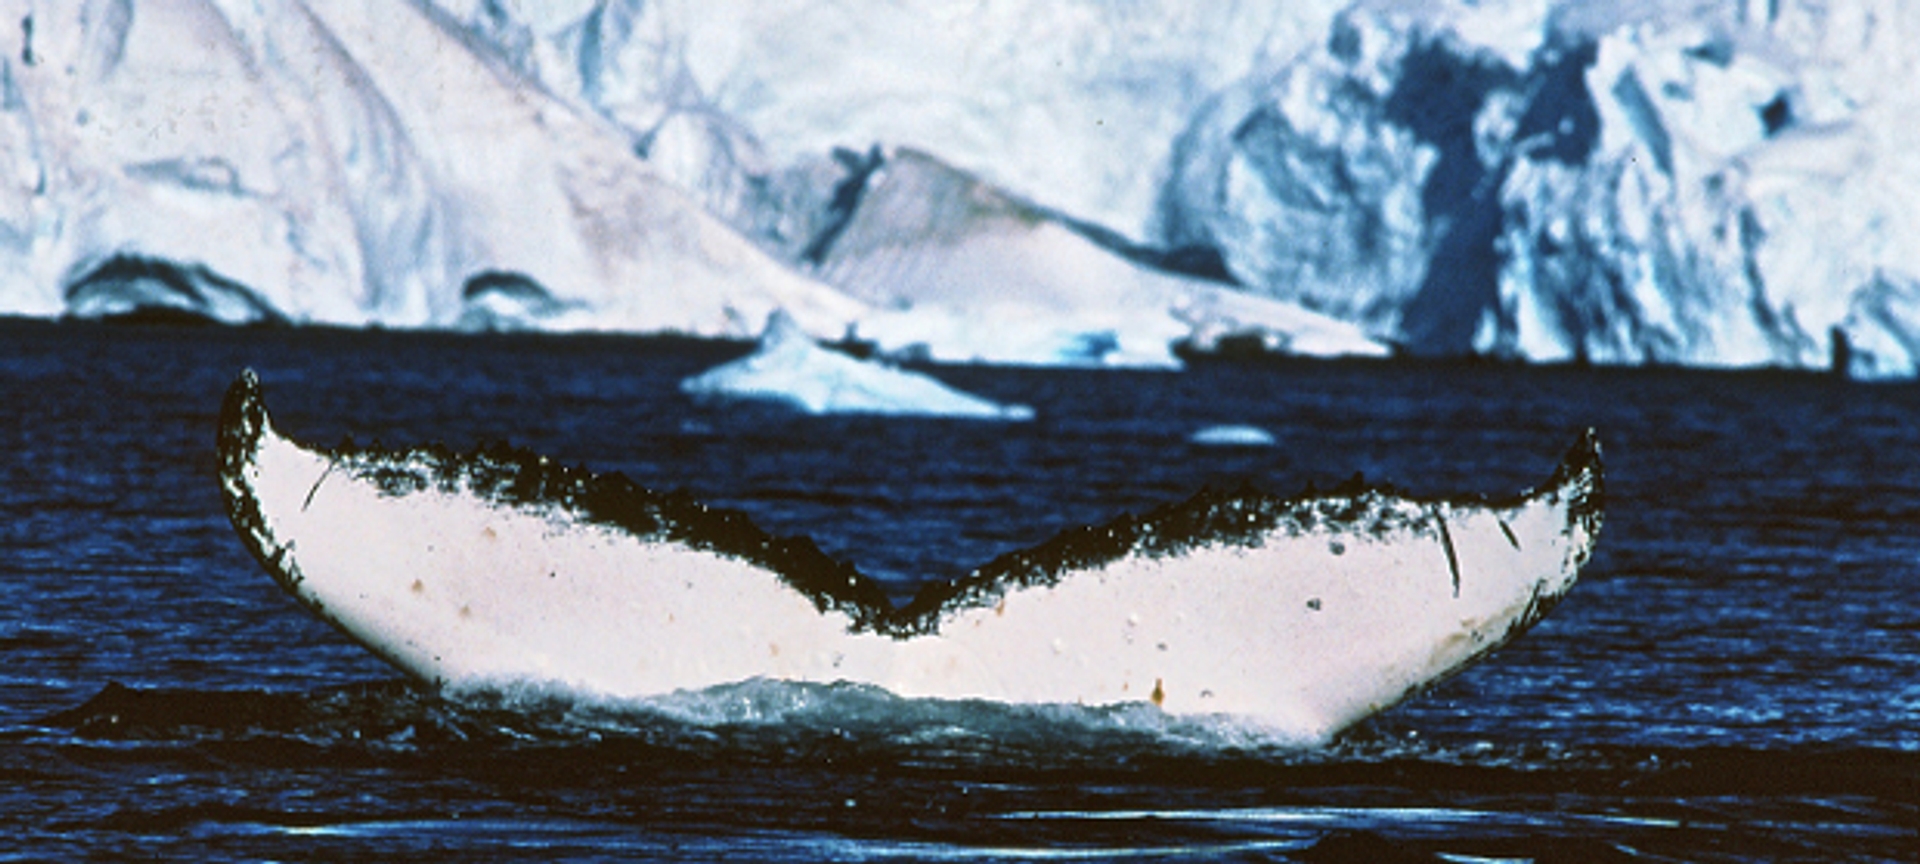 Flickr_walvis_Antartic_and_Southern_Ocean_Coalition_620